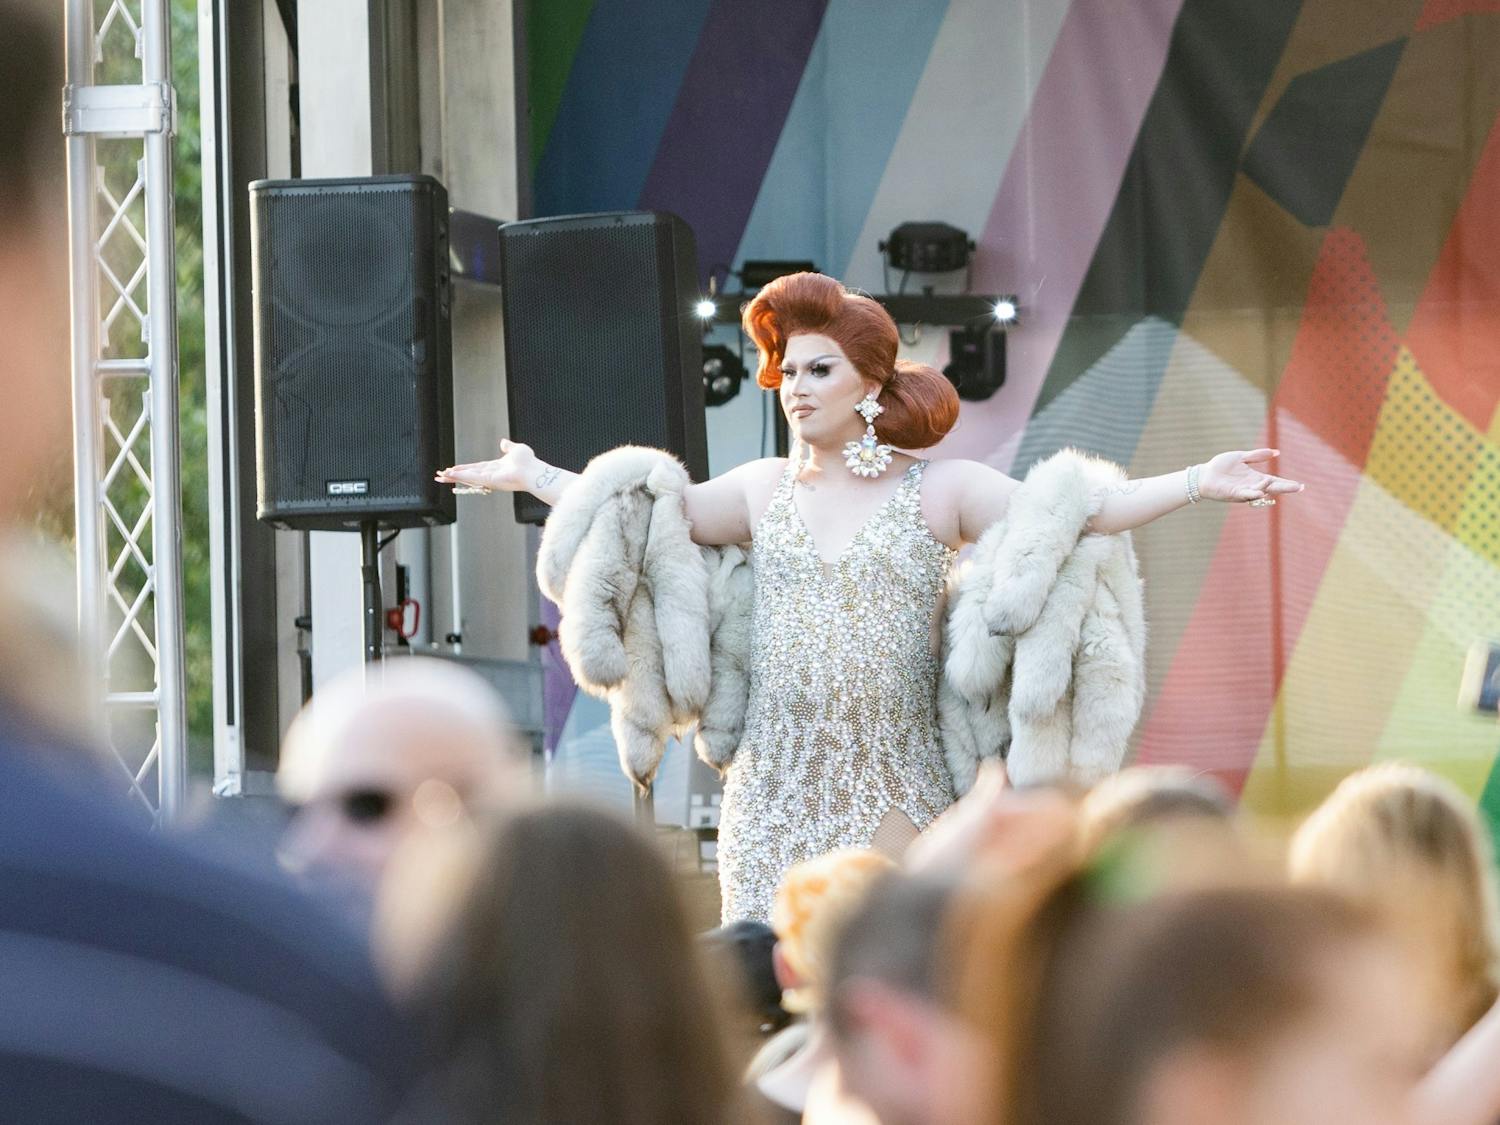 A drag queen walks across the stage in an attempt to win the title of Miss Outfest 2022 on June 4, 2022. Outfest featured performances, food and vendors in honor of Pride month.